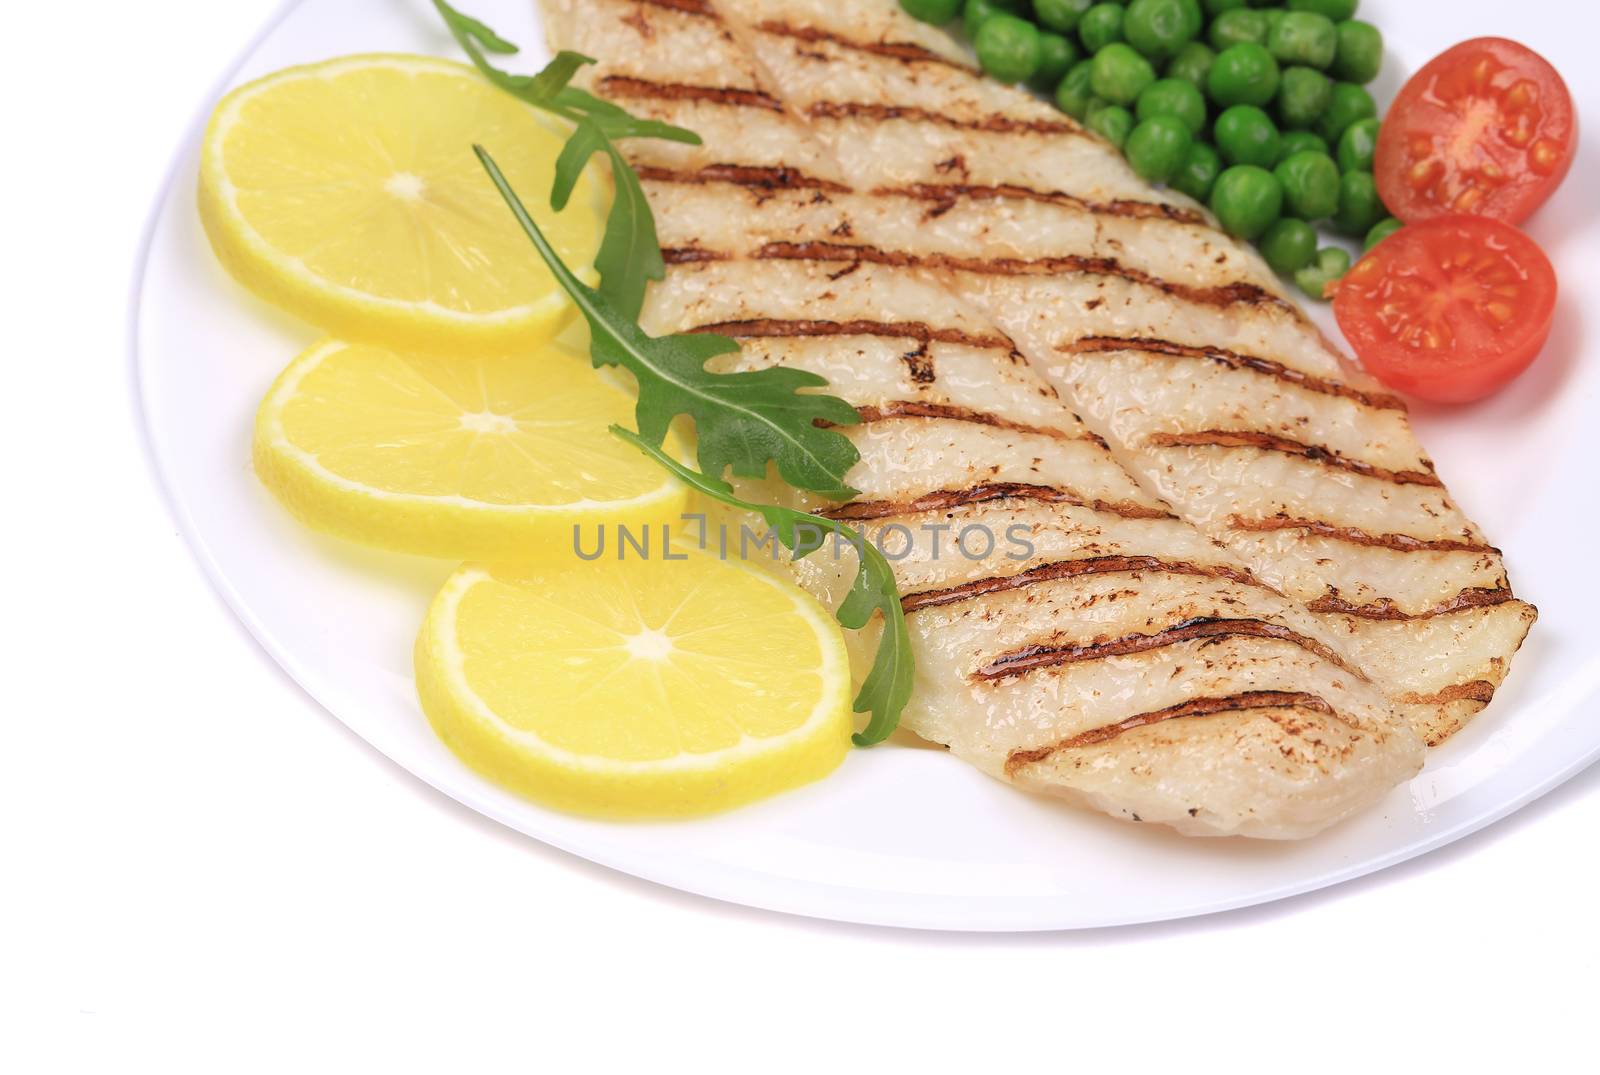 Grilled fish fillet with vegetables. by indigolotos